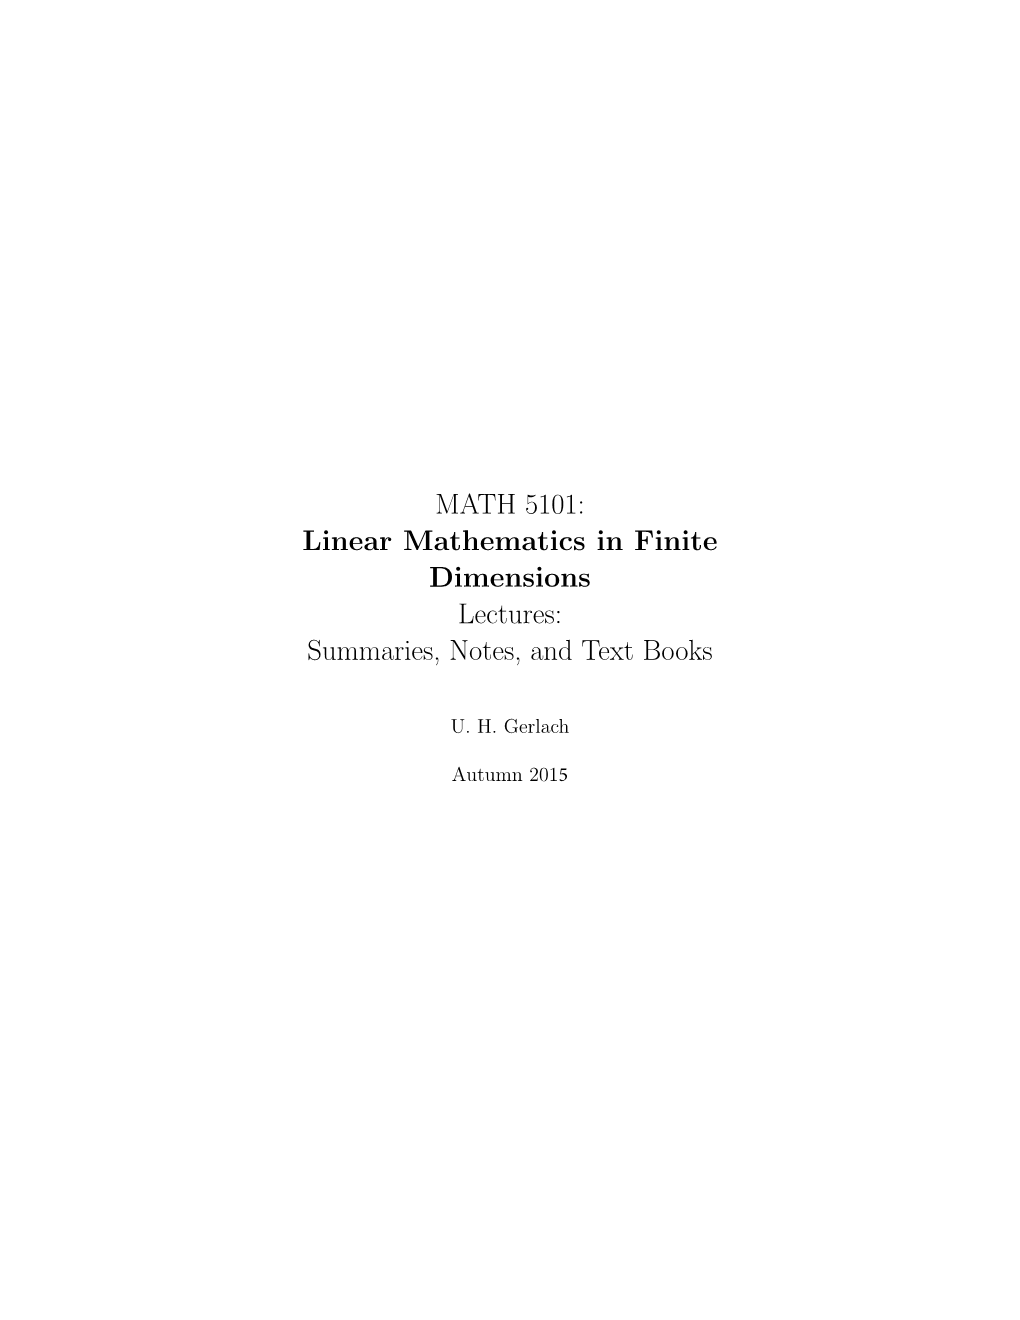 MATH 5101: Linear Mathematics in Finite Dimensions Lectures: Summaries, Notes, and Text Books